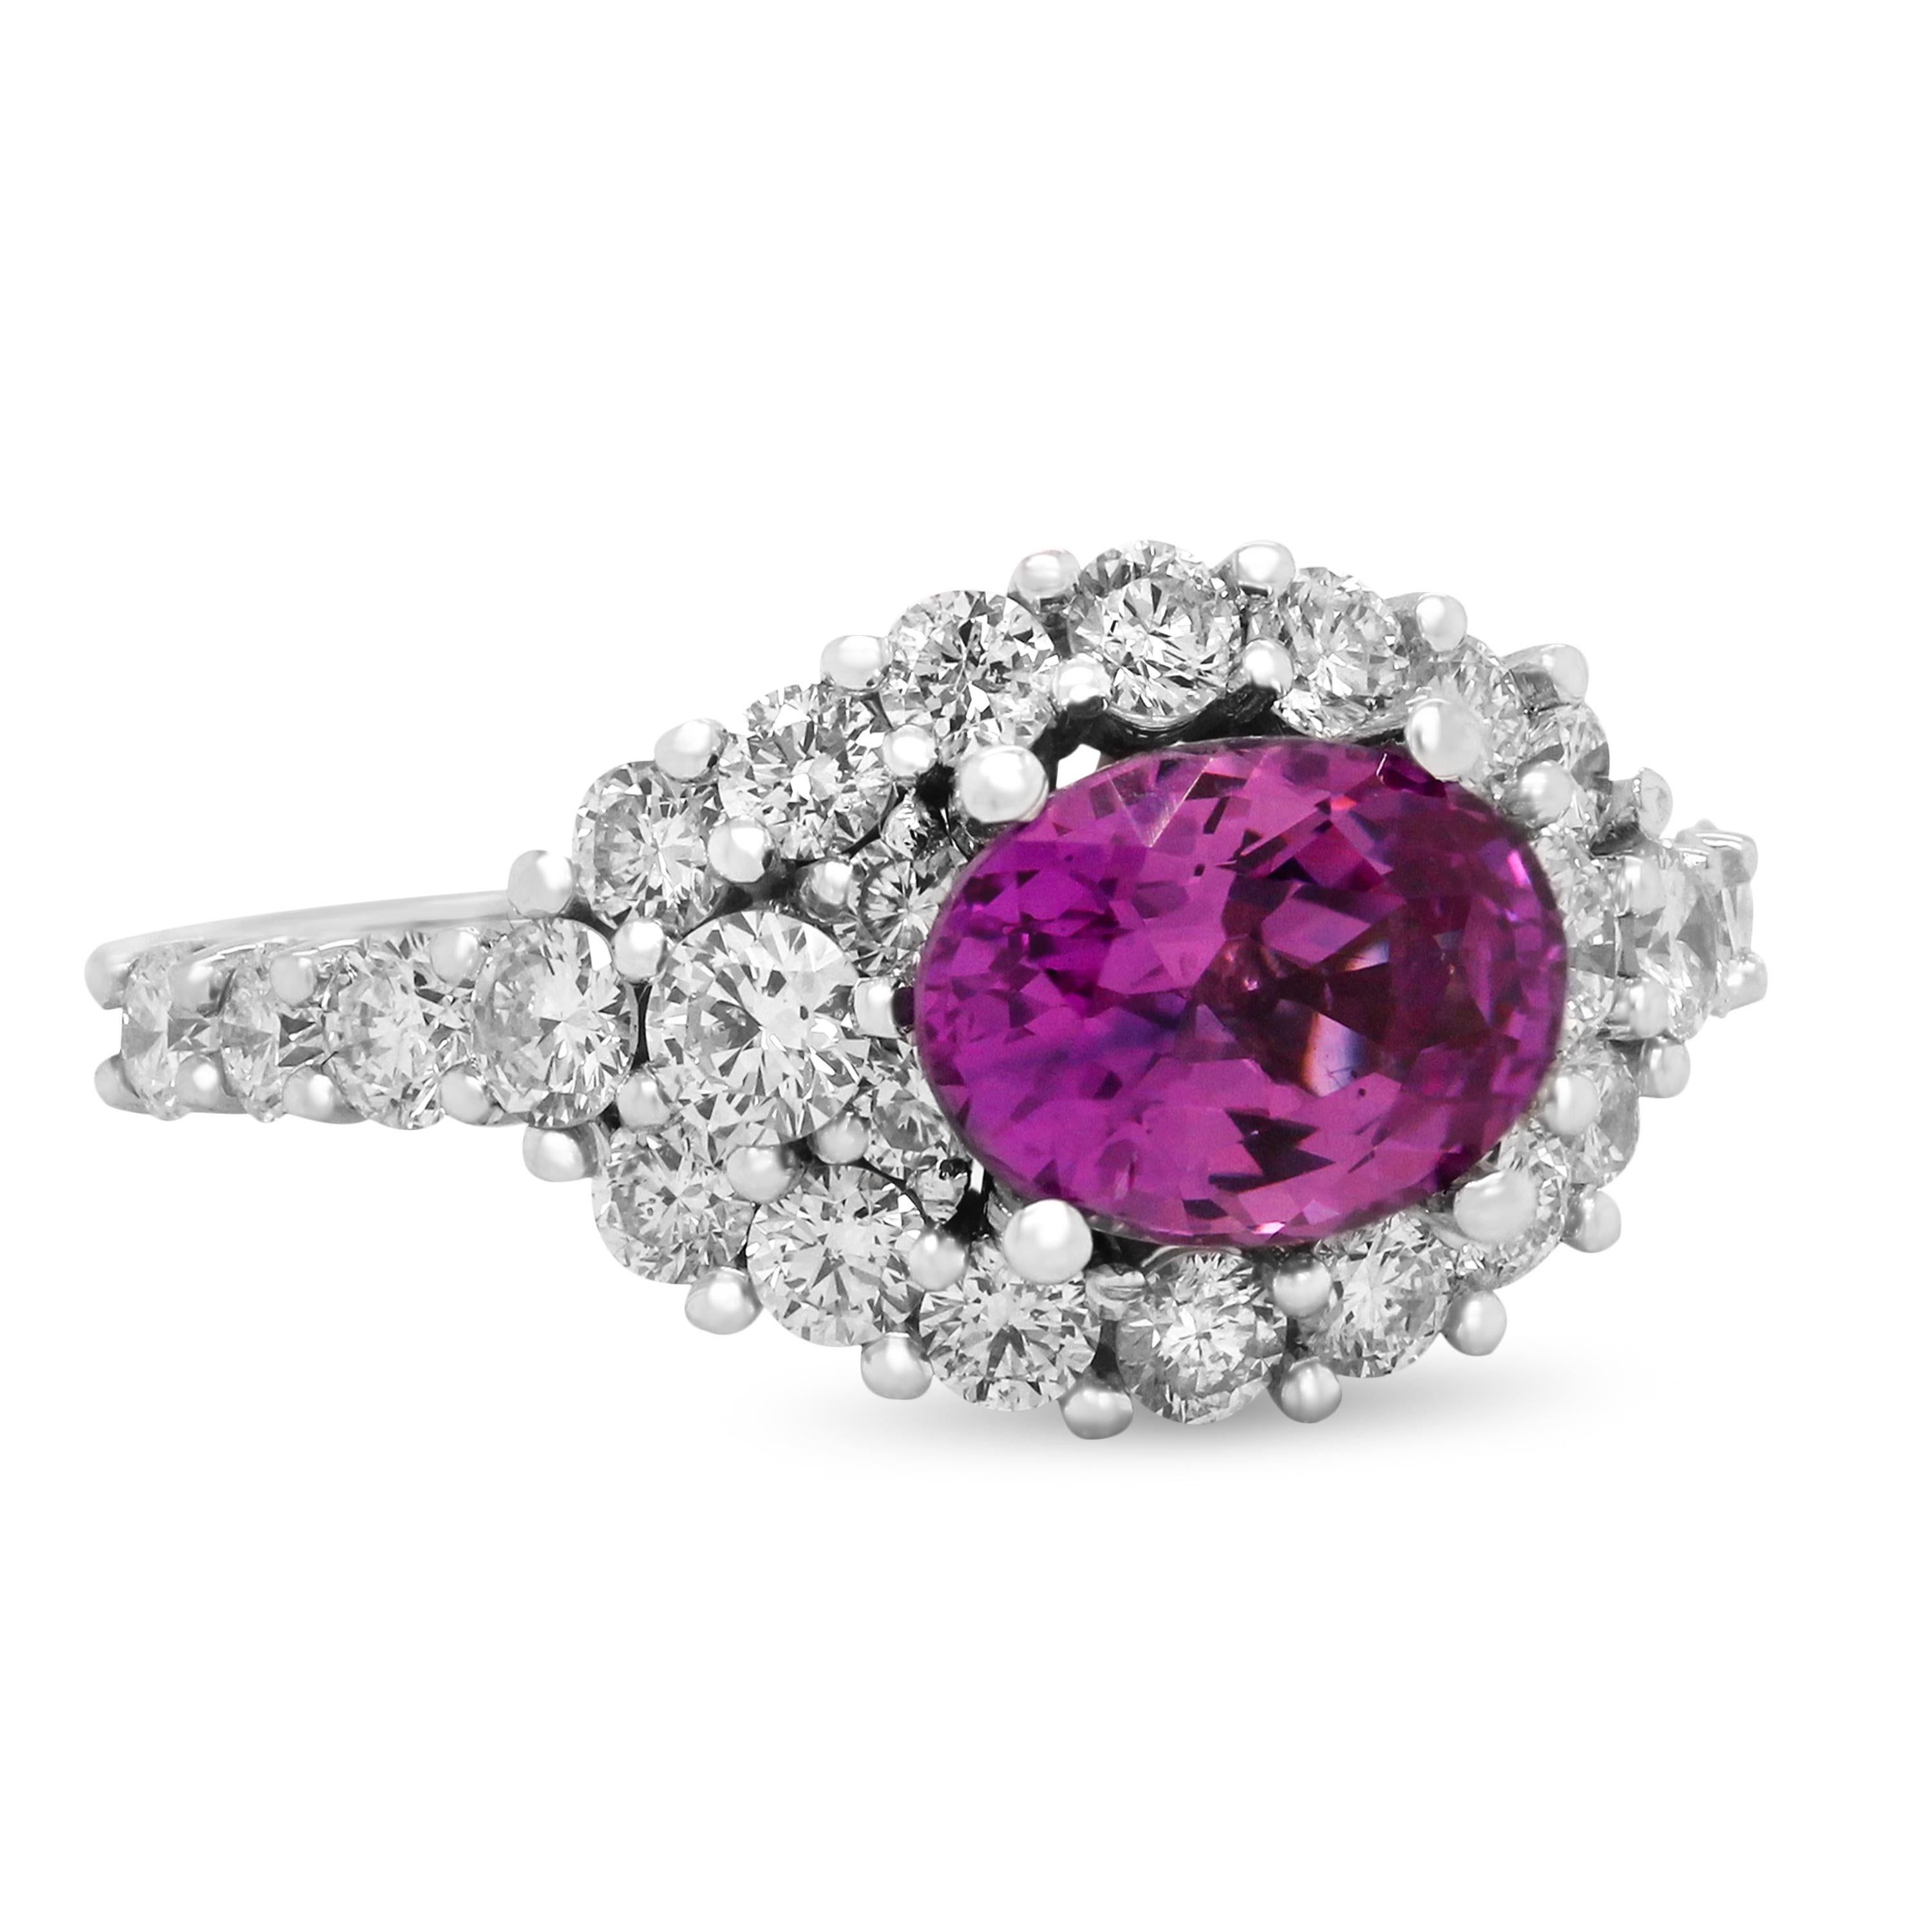 2.02 Carat Oval Bubble Gum Pink Sapphire 14K White Gold Diamond Cocktail Ring

This one-of-a-kind ring showcases a pink sapphire center, oval-cut, that is truly remarkable in color. The Sapphire has the bubble gum color that is typically seen in